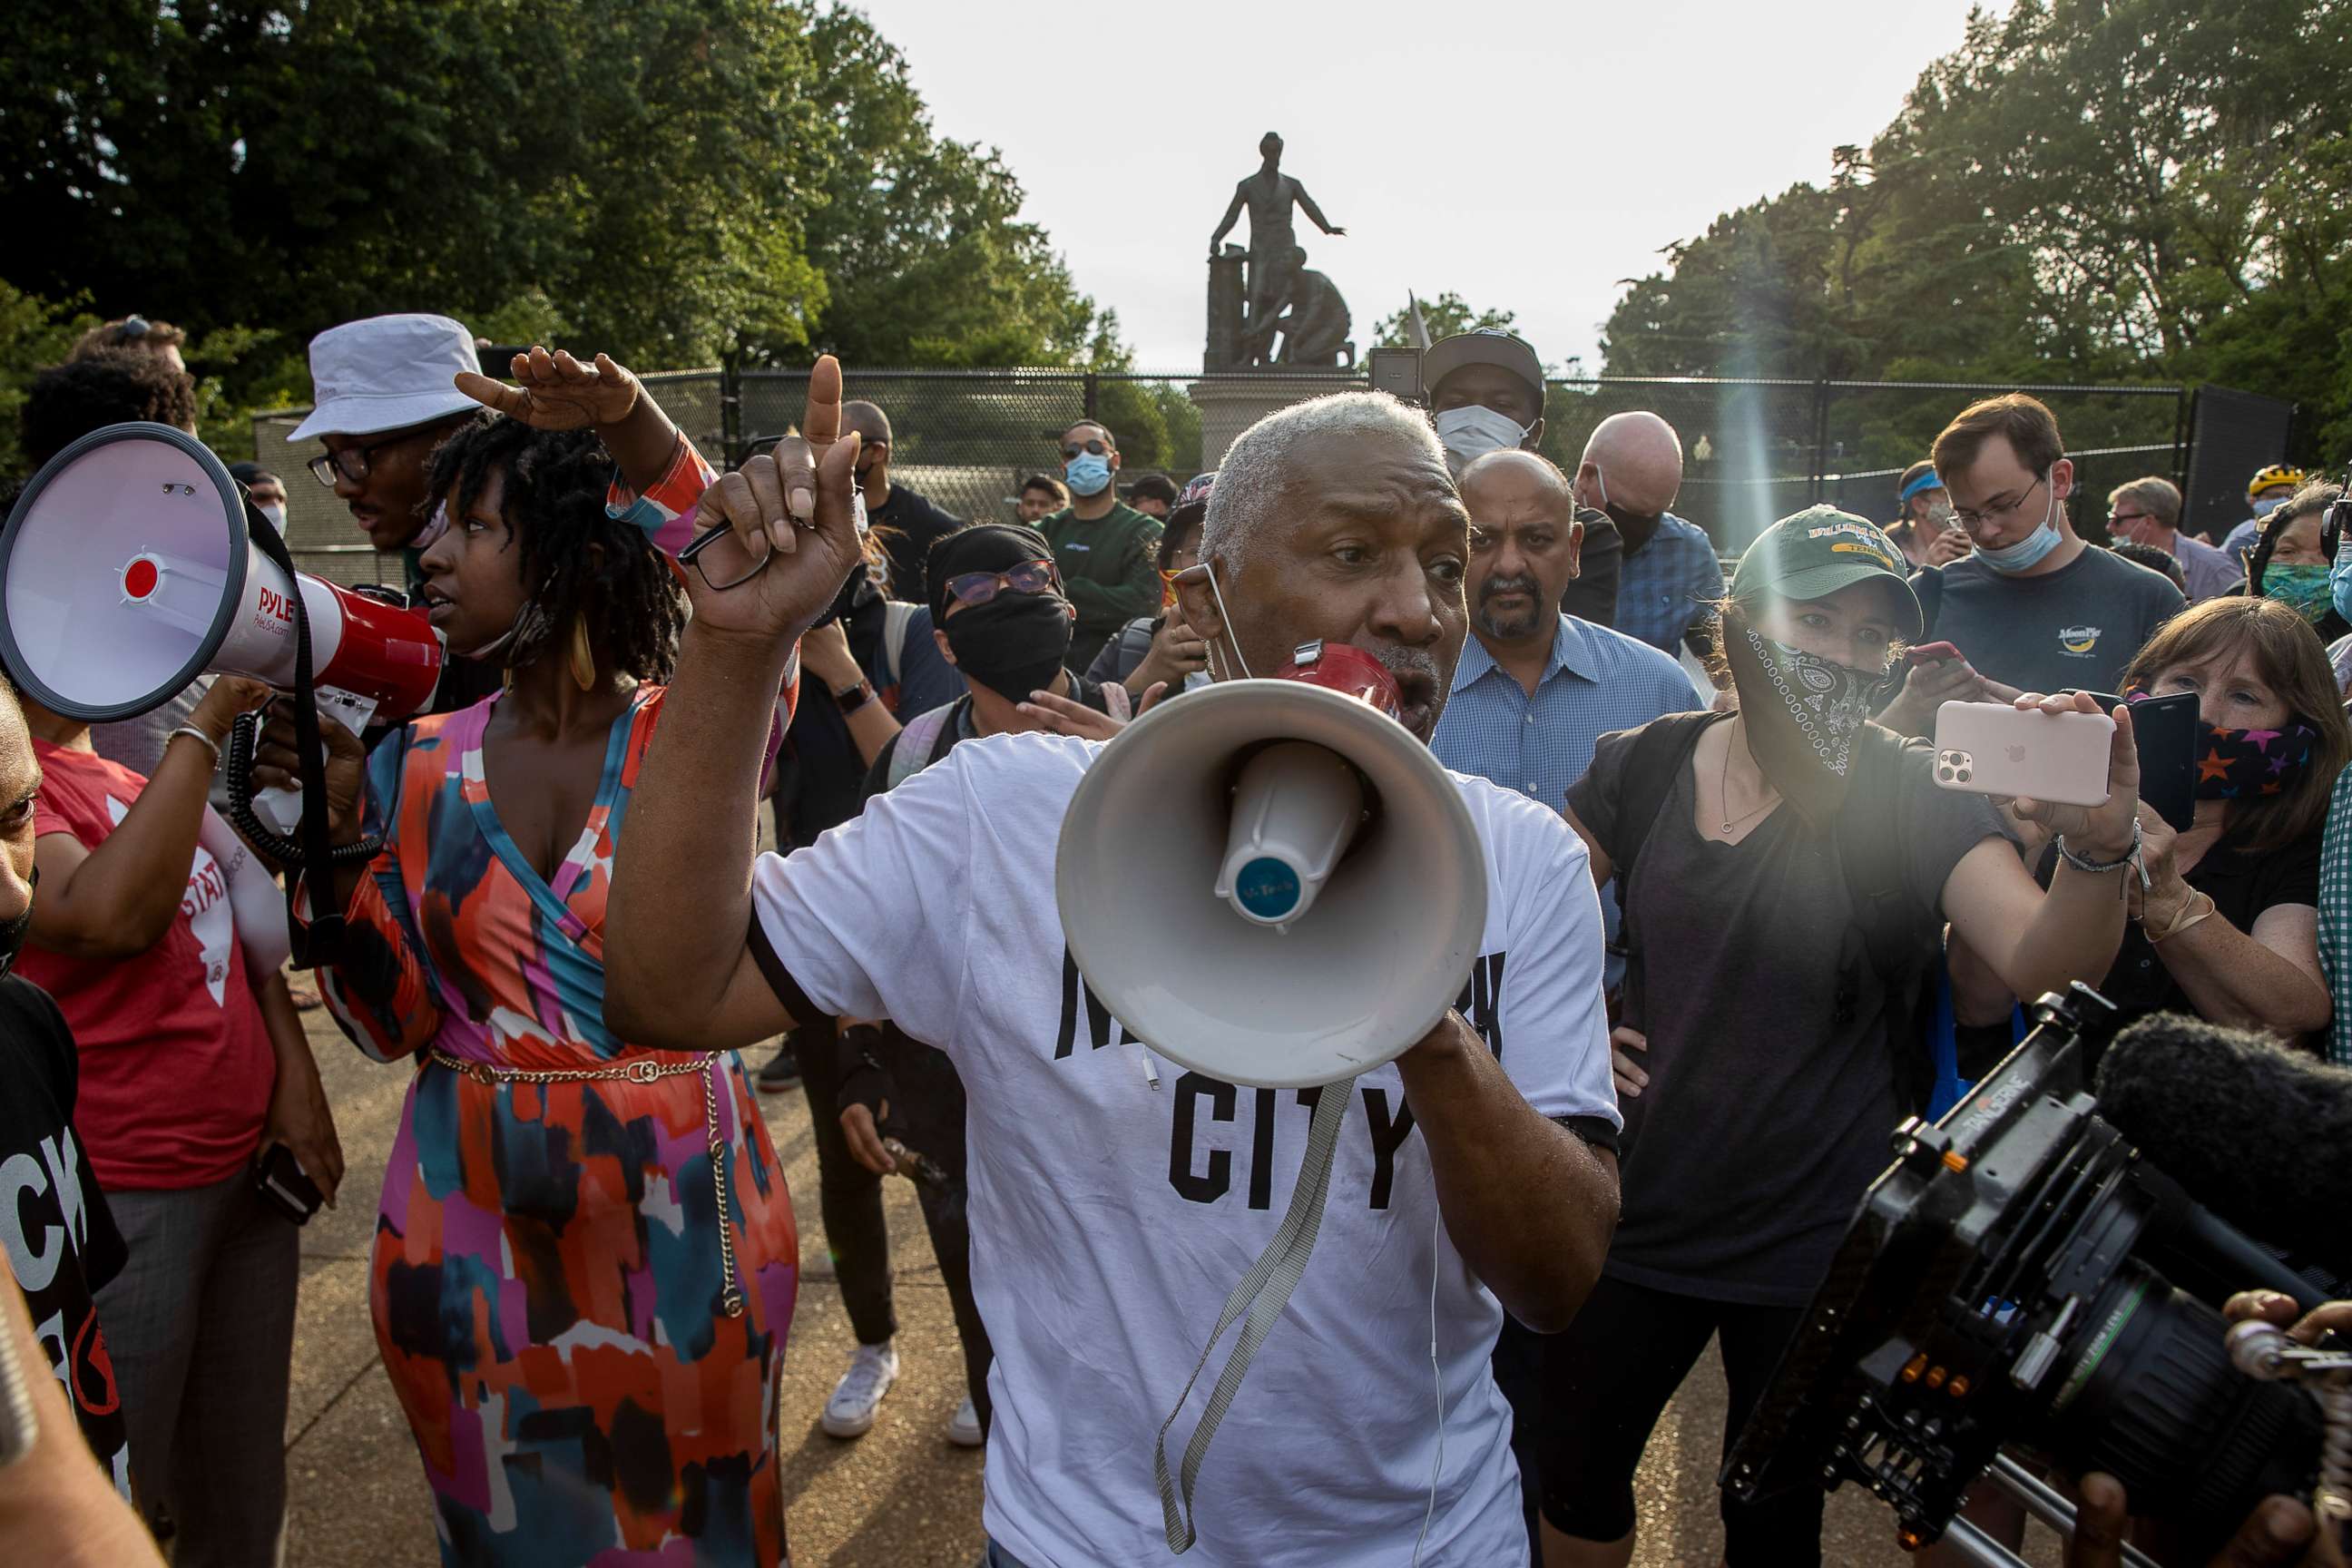 PHOTO: Protesters for and against the removal of the Emancipation Memorial debate in Lincoln Park on June 26, 2020 in Washington, DC.